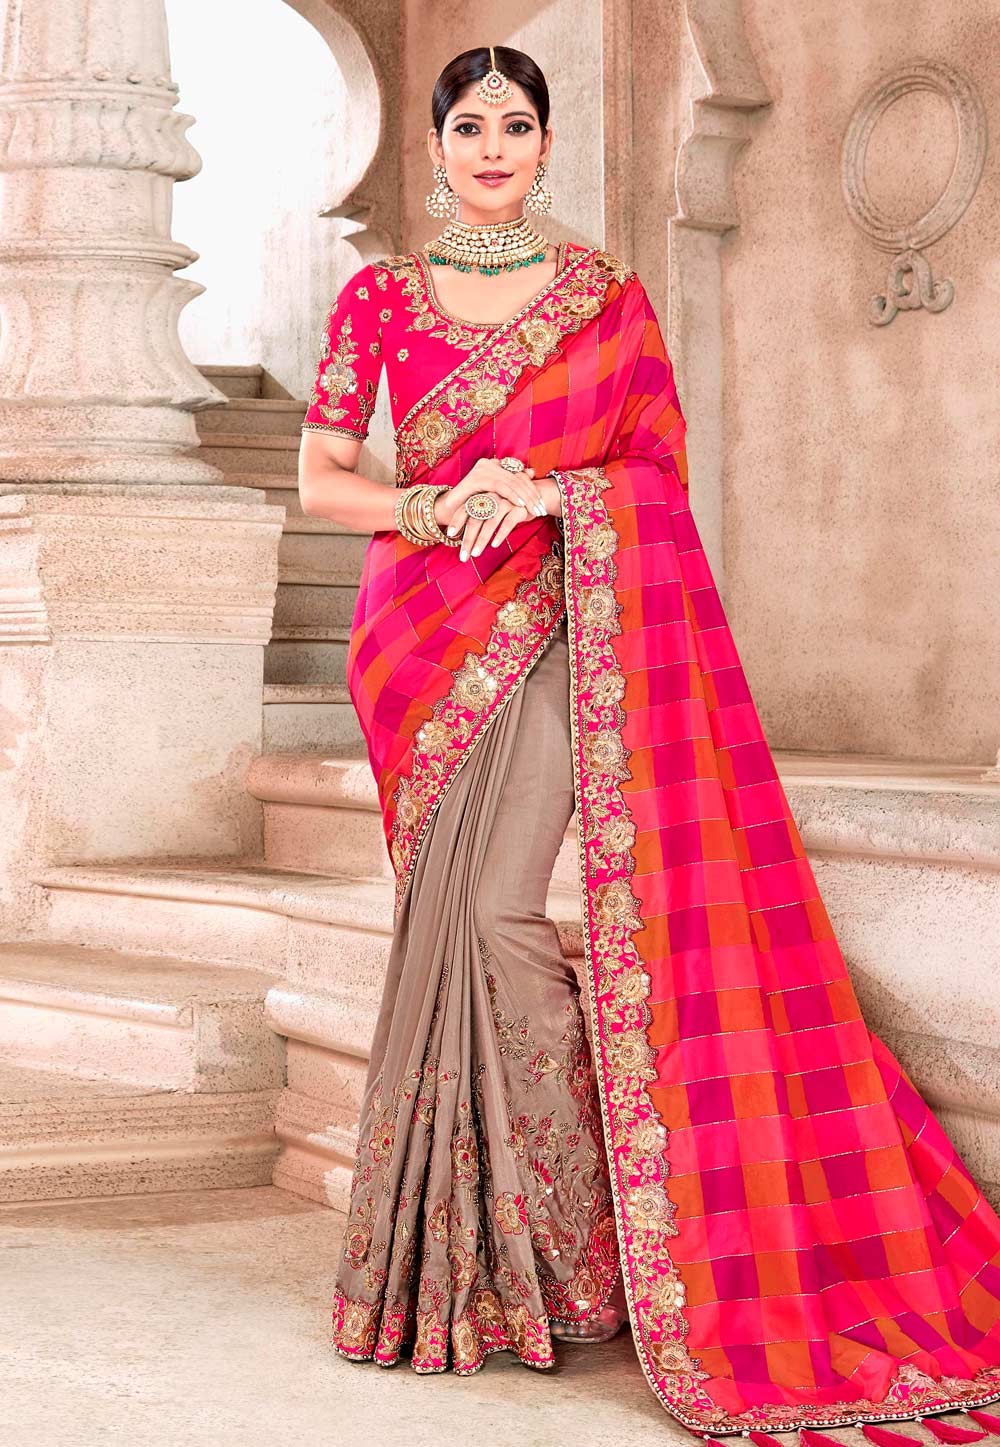 Which saree draping style is the most unique? - Quora-nlmtdanang.com.vn